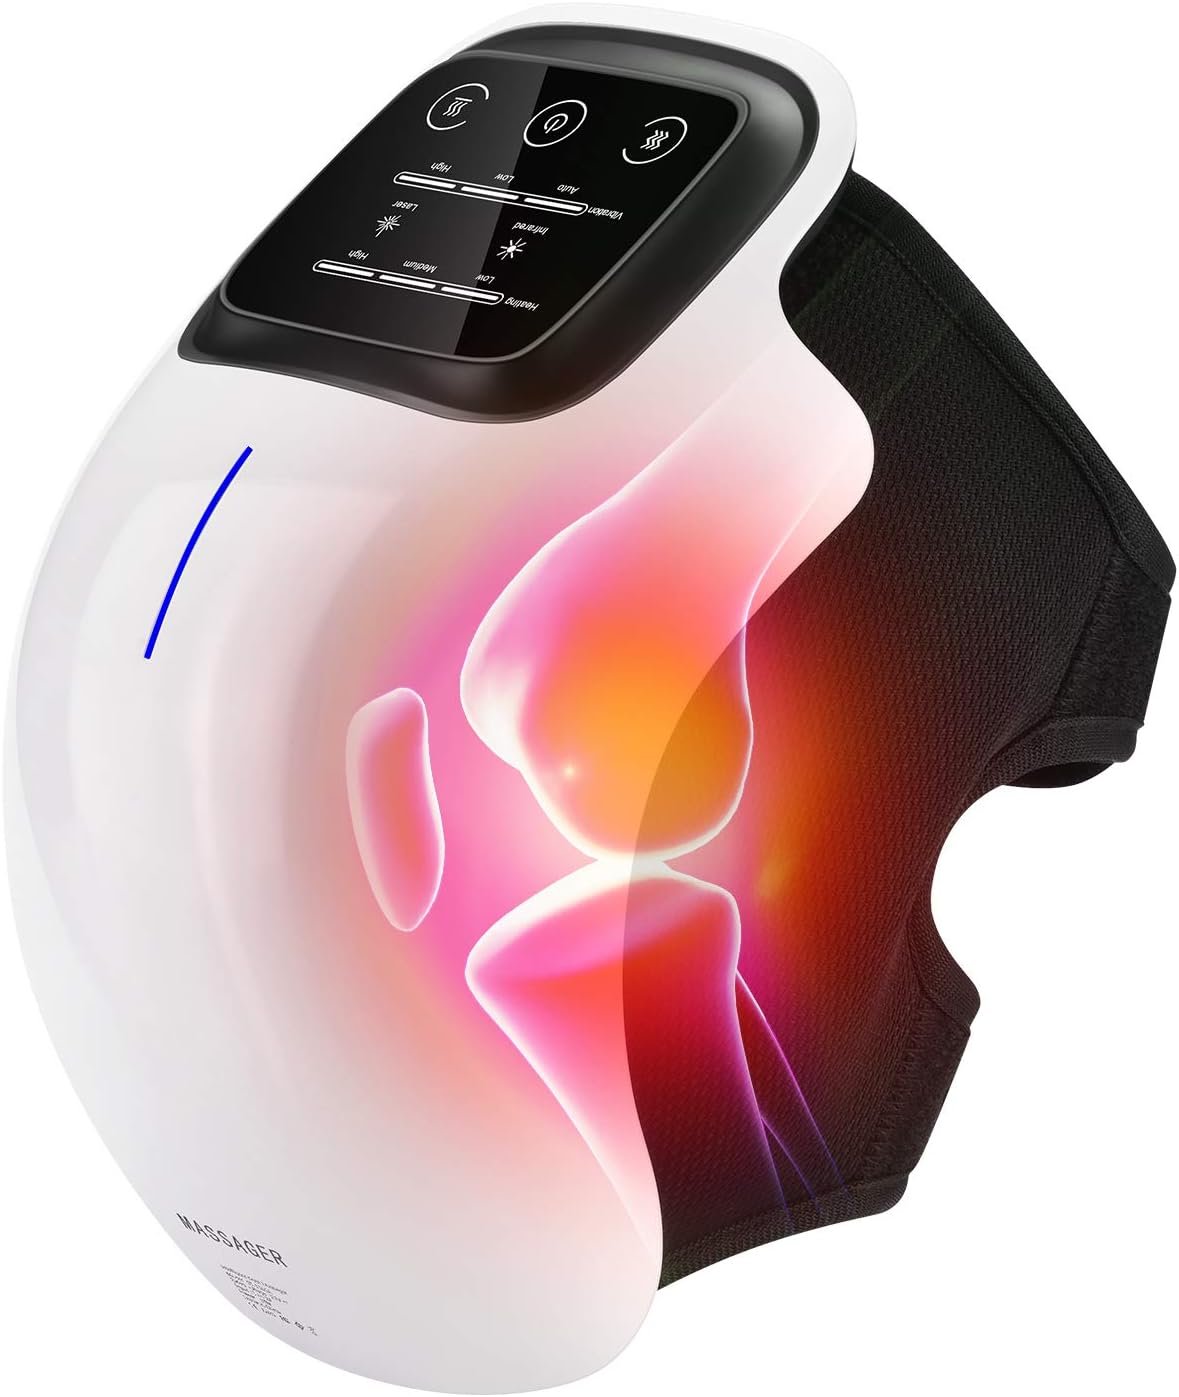 Read more about the article FORTHiQ Cordless Knee Massager, FDA Registered, Infrared Heat and Vibration Knee Pain Relief for Swelling Stiff Joints, Stretched Ligament and Muscles Injuries for ONLY $118.98 (Was $199.99)